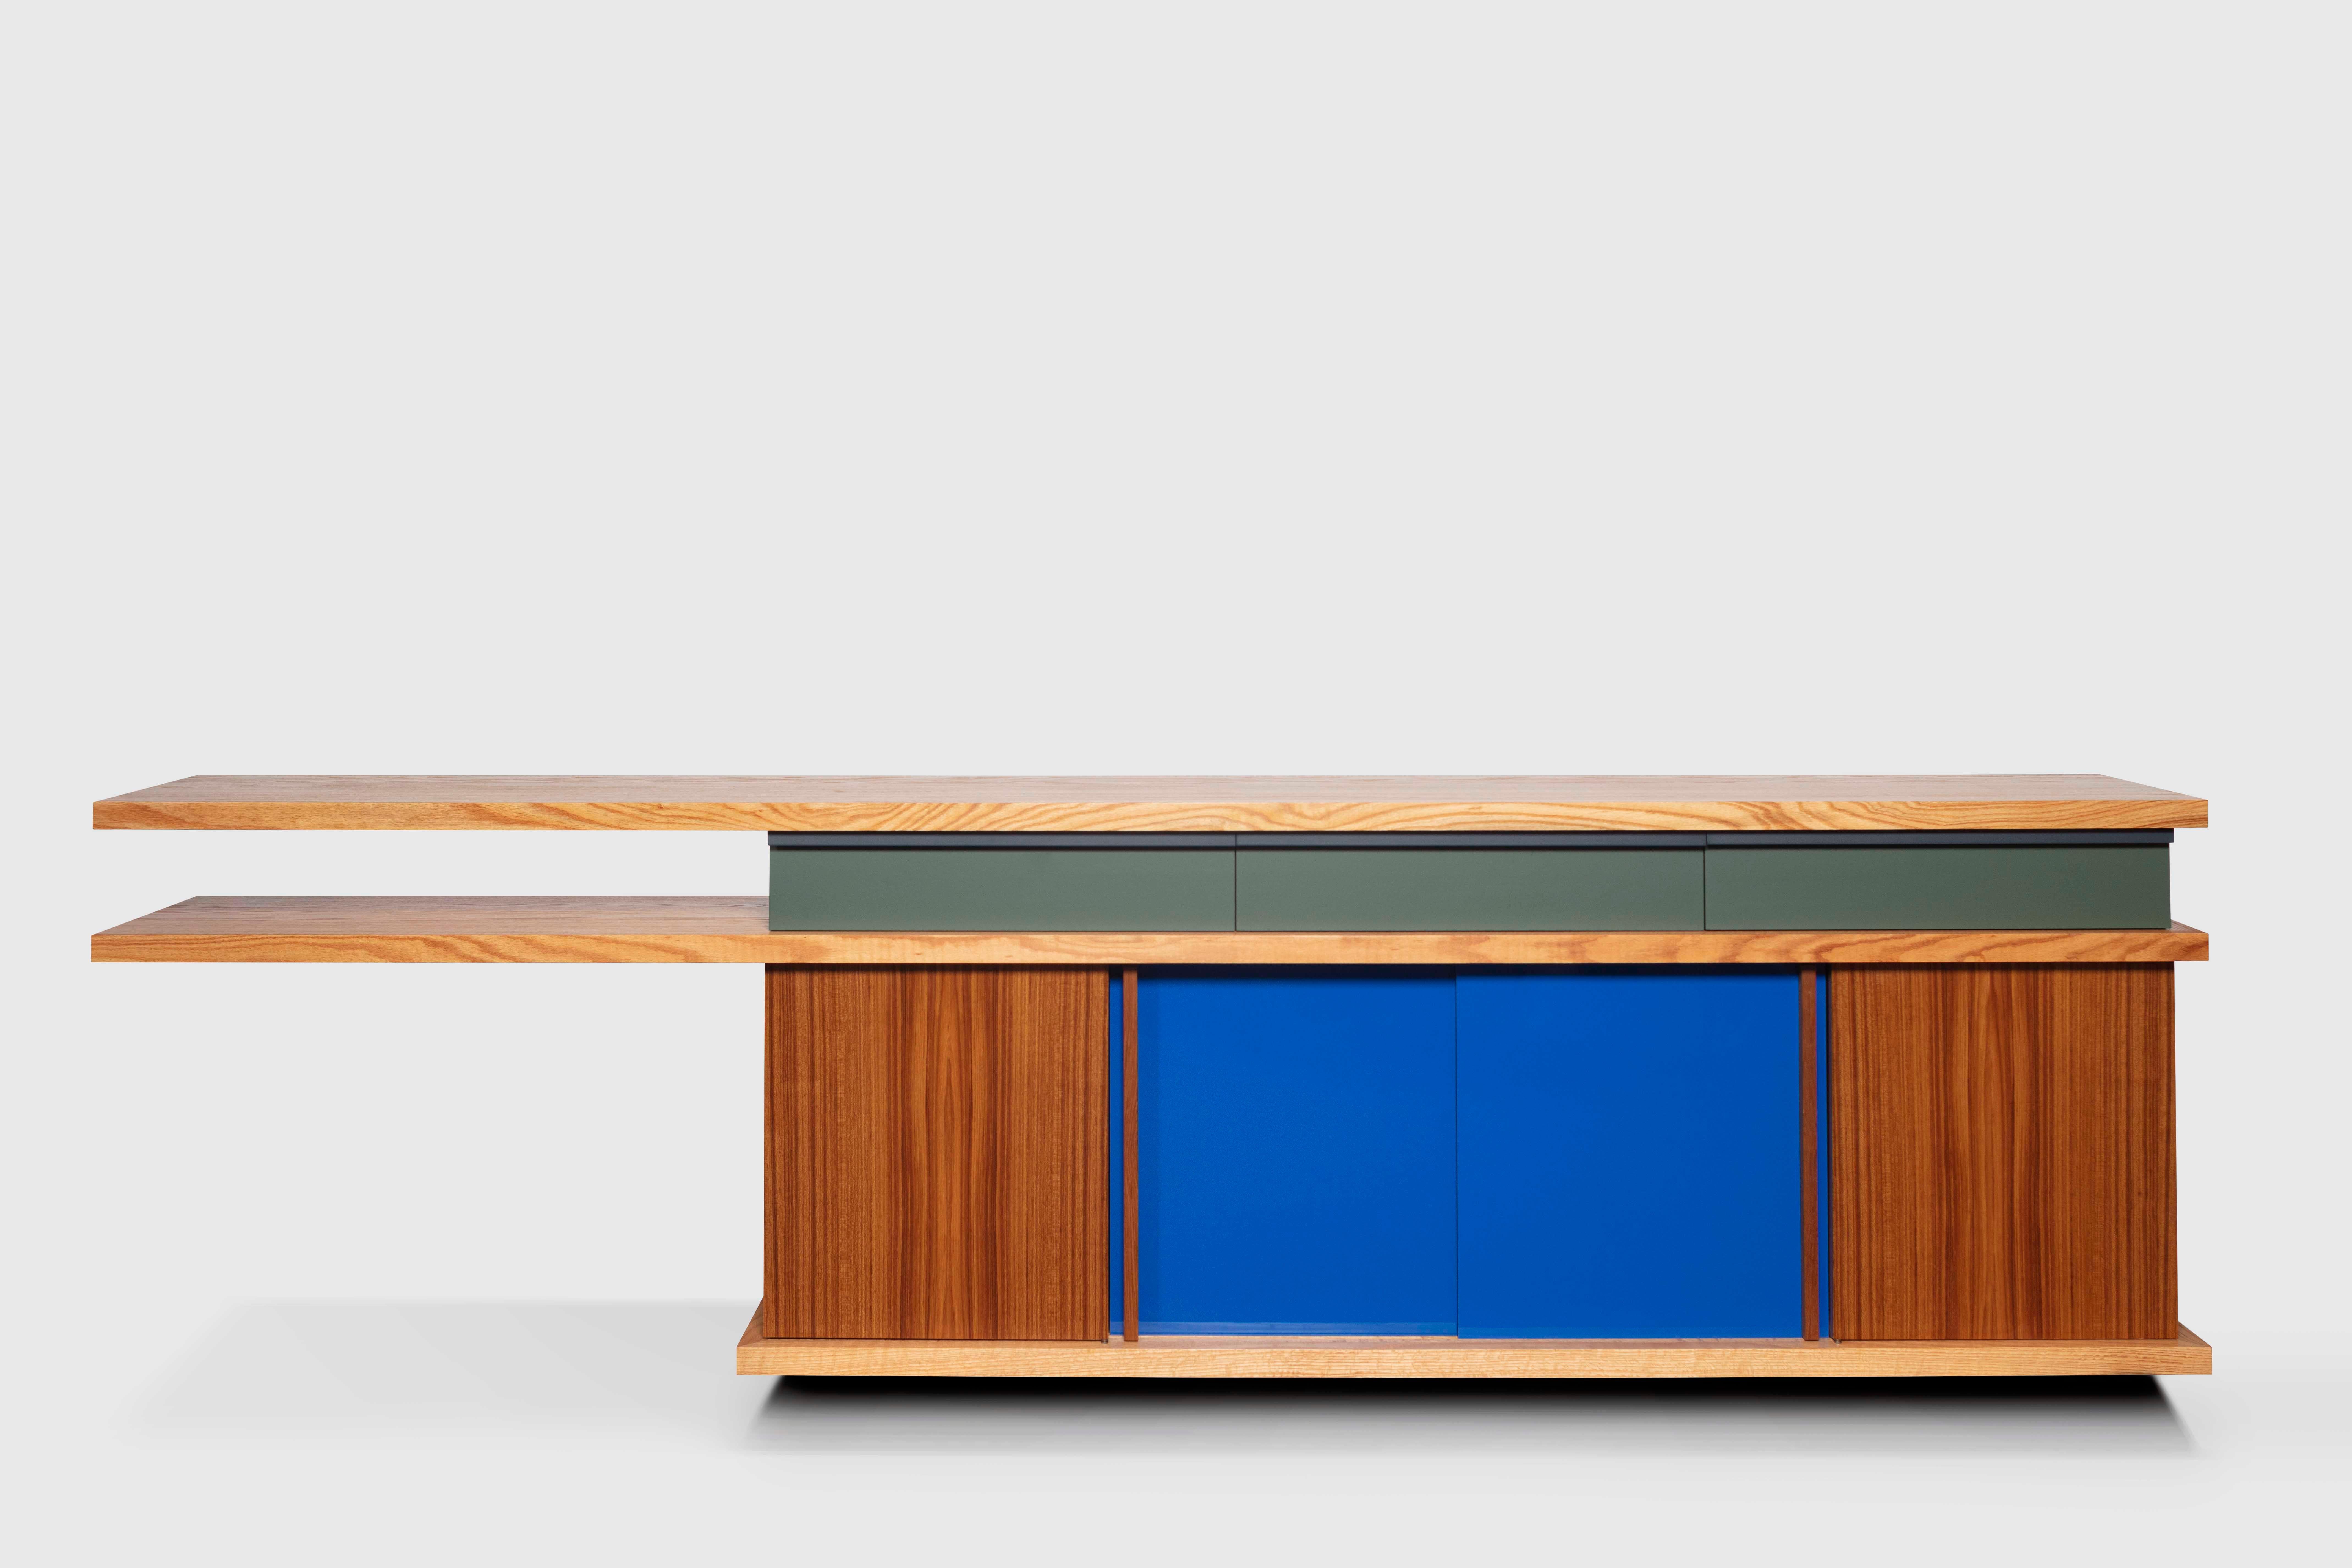 Ray Kappe RK5 credenza in red oak / teak by Original in Berlin, Germany, 2020

This Credenza has Teak veneered doors, formica sliding doors and red oak boards.

California Modernism is synonymous with sophisticated minimal structures, featuring